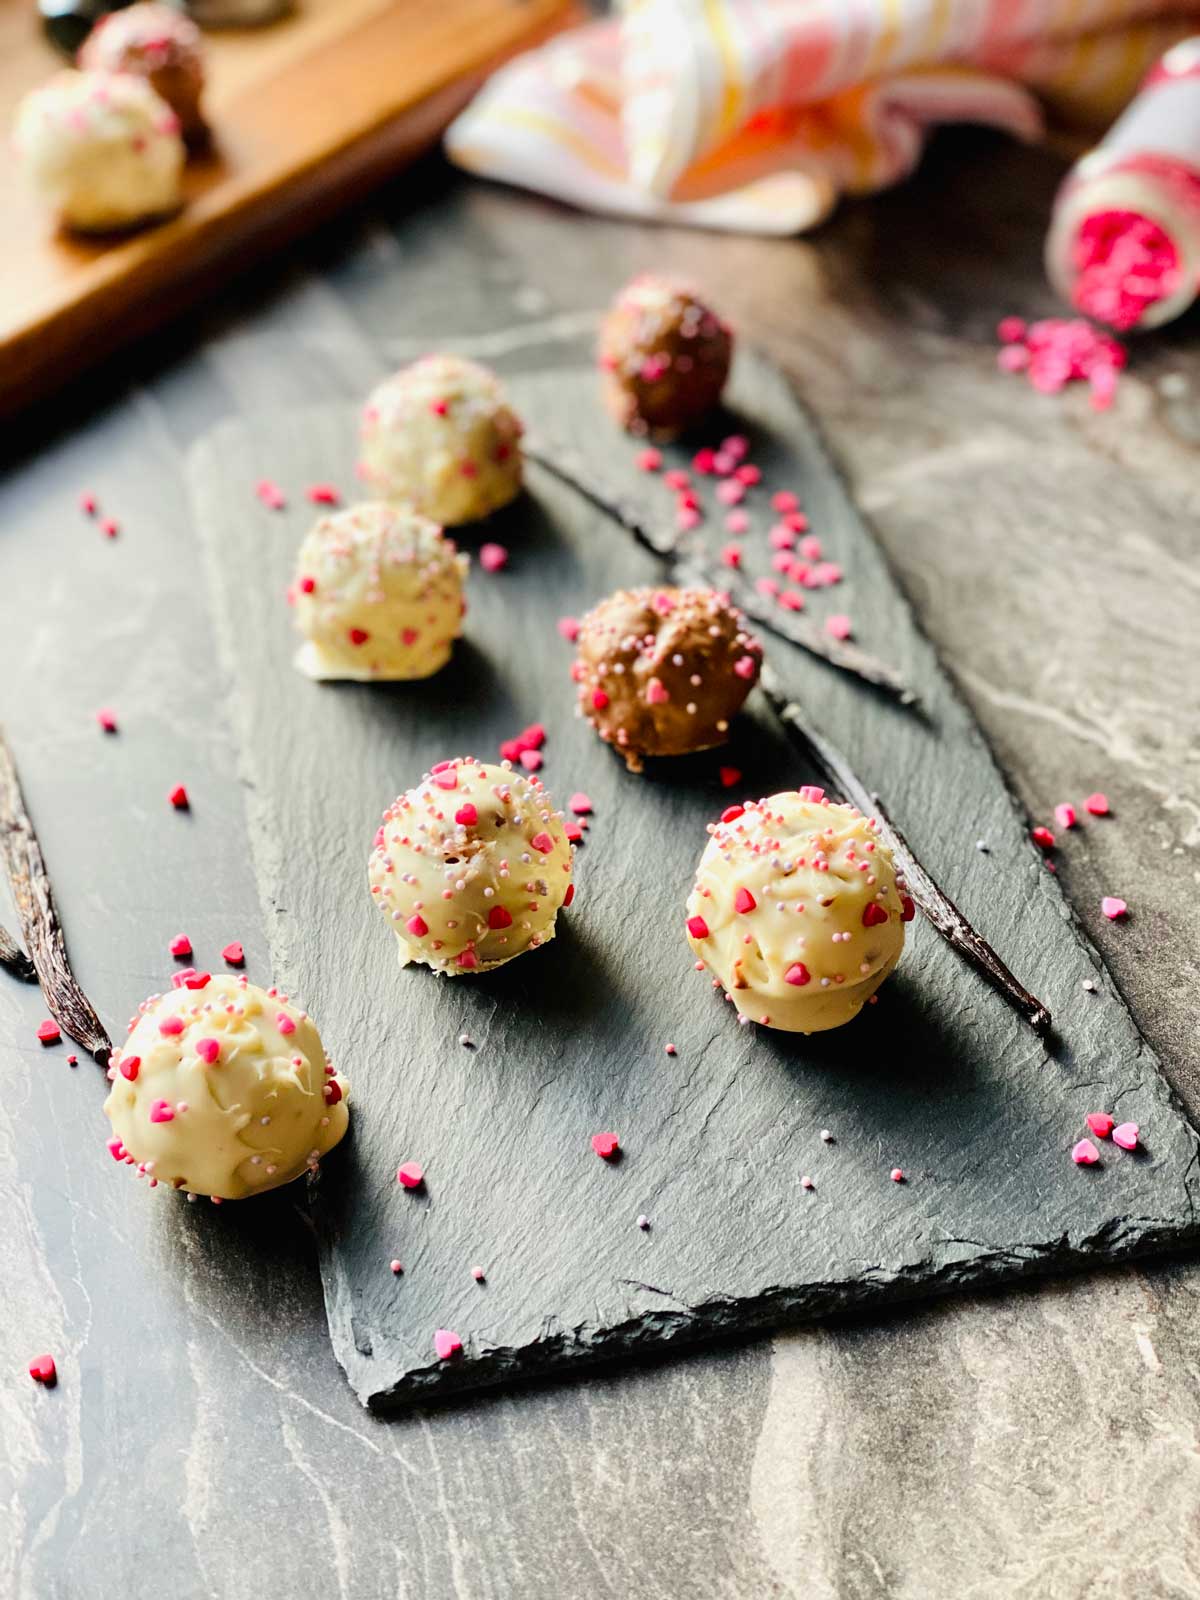 milk and chocholate cake pops on a black slate with two vanilla pods and scattered little pink sugar hearts